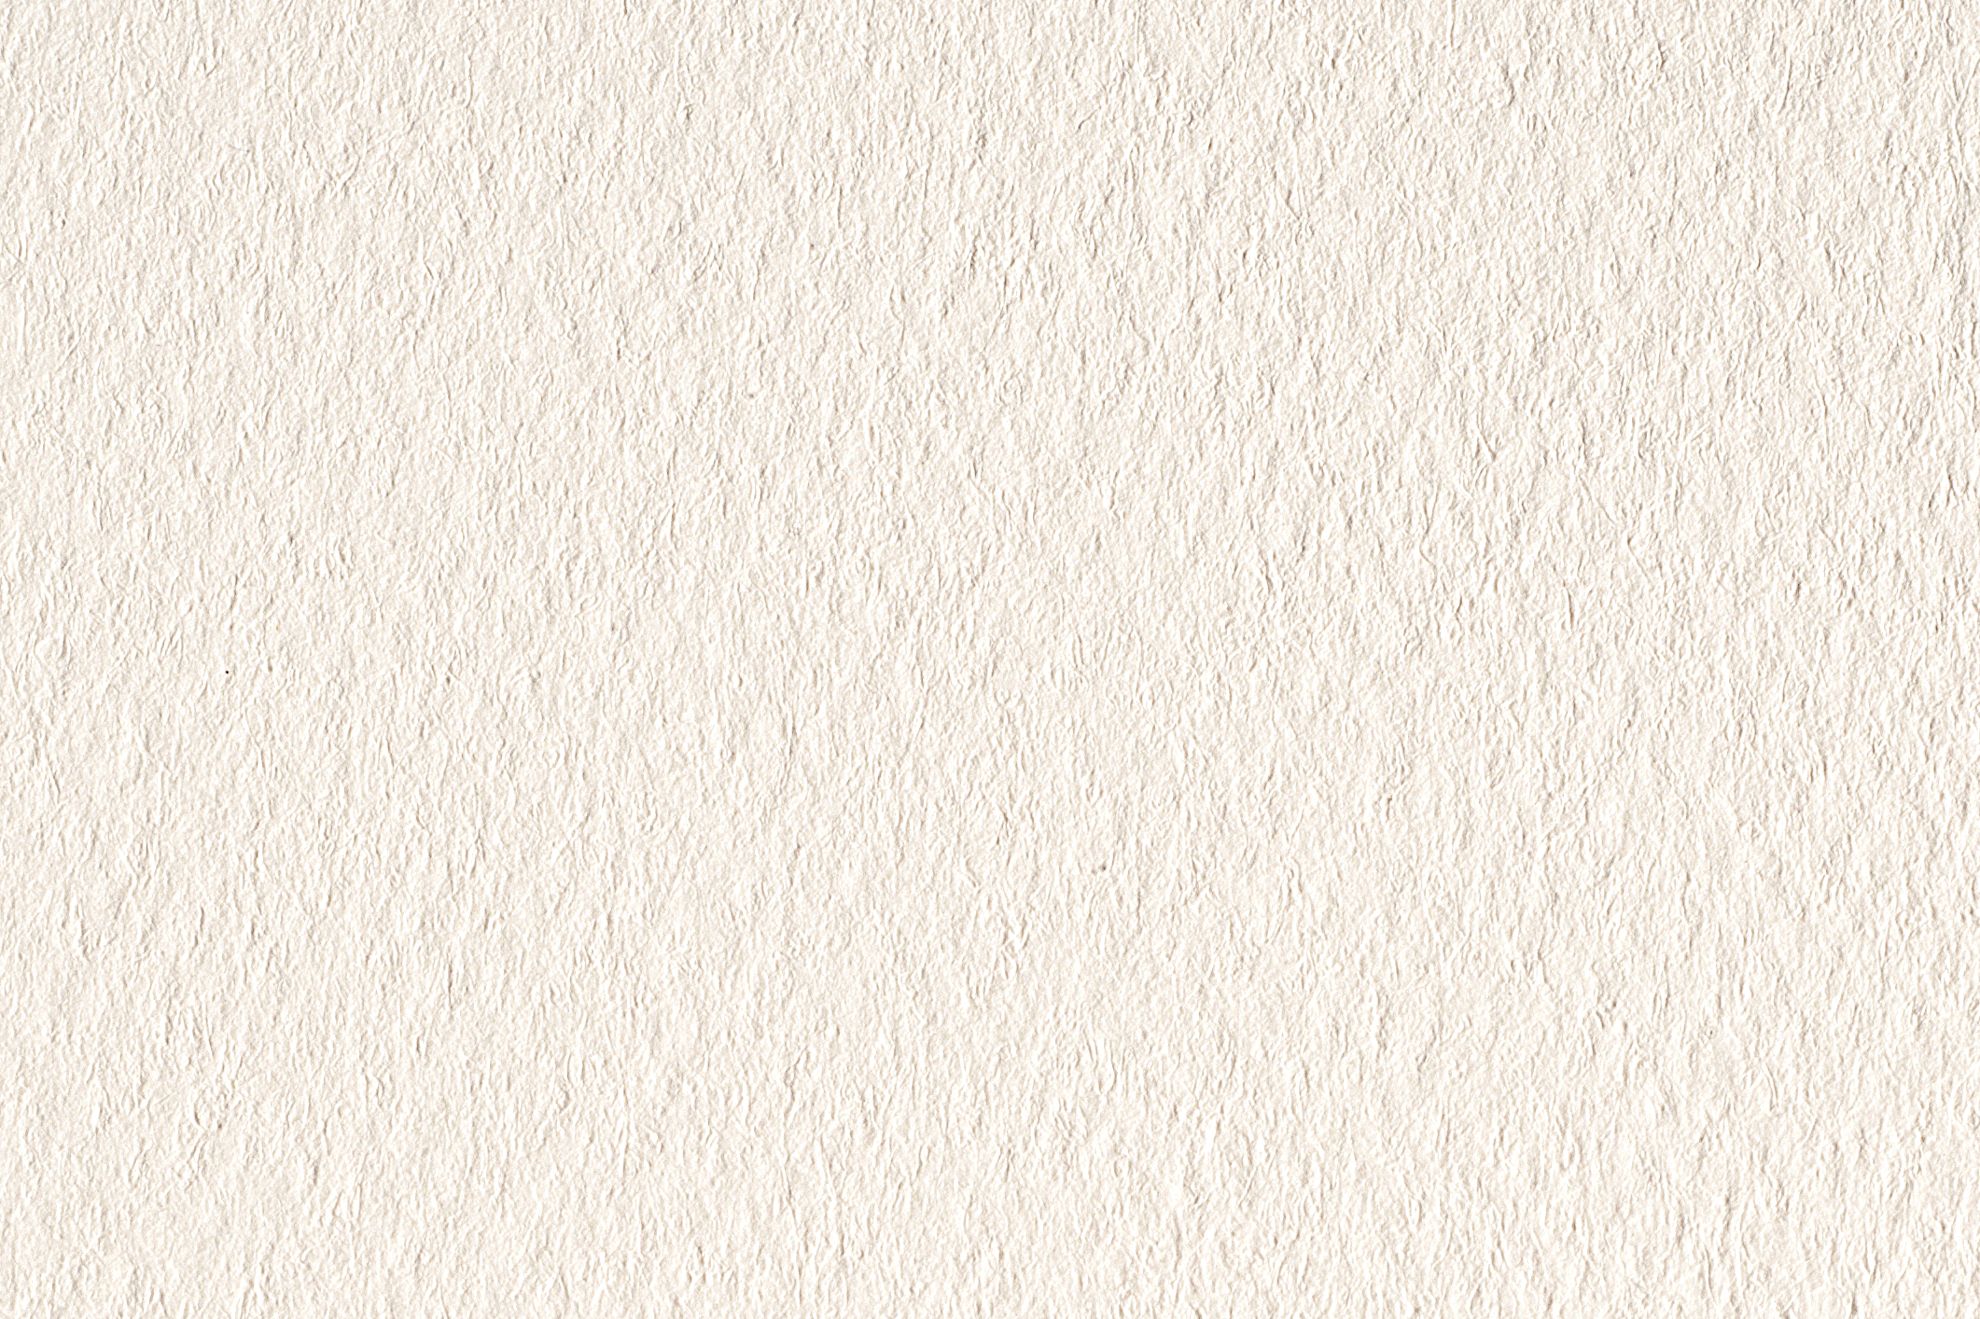 Tintoretto: Snow, Cream (no strip, square cut): Natural paper made of FSC certified pure cellulose. Surface: embossed and slightly hammered. Producer: Fedrigoni